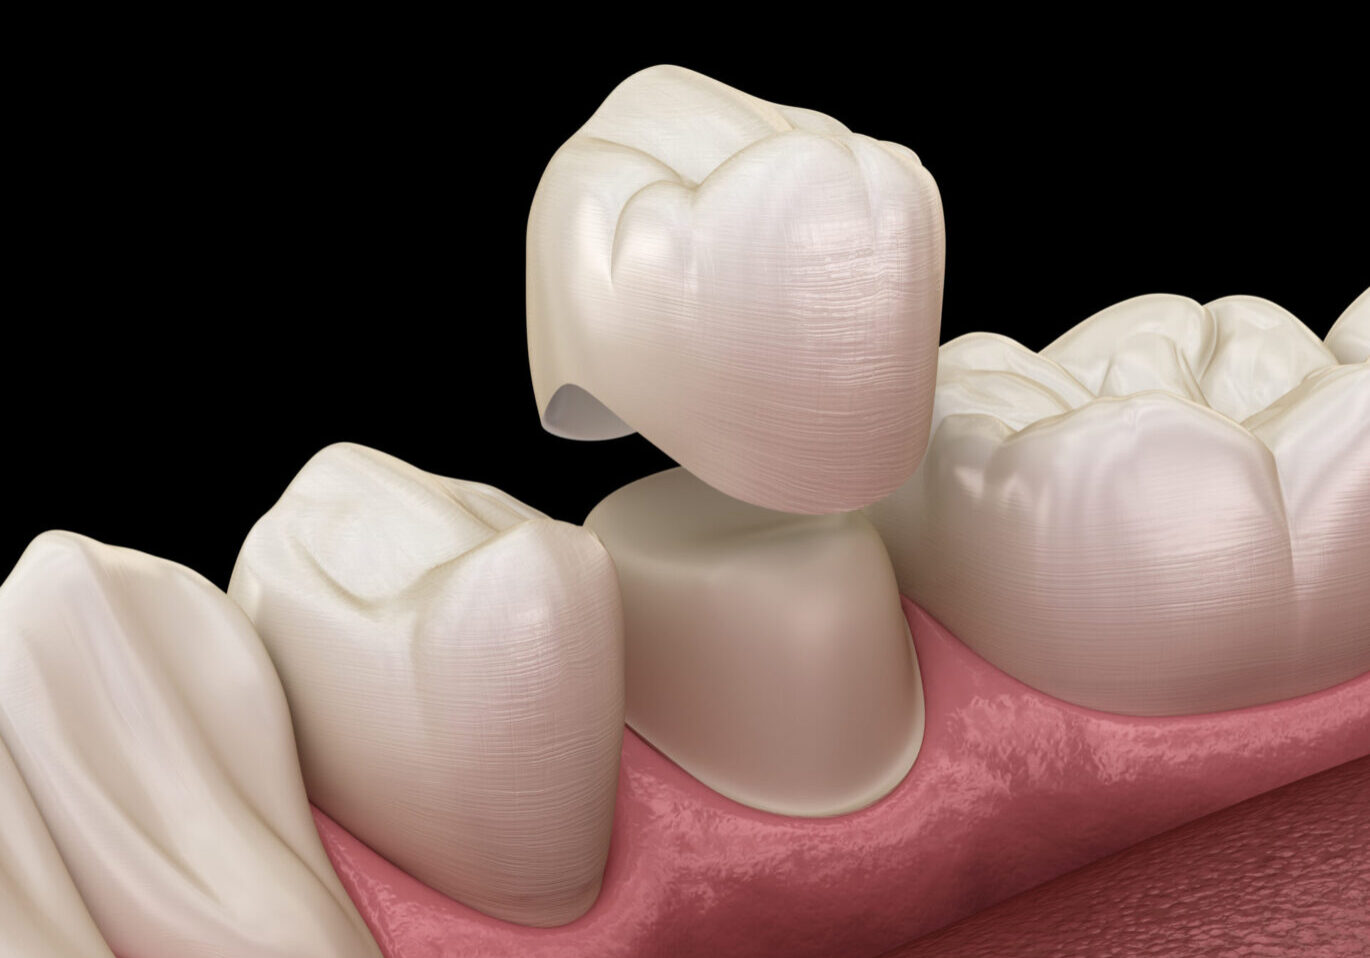 Dental,Crown,Premolar,Tooth,Assembly,Process.,Medically,Accurate,3d,Illustration